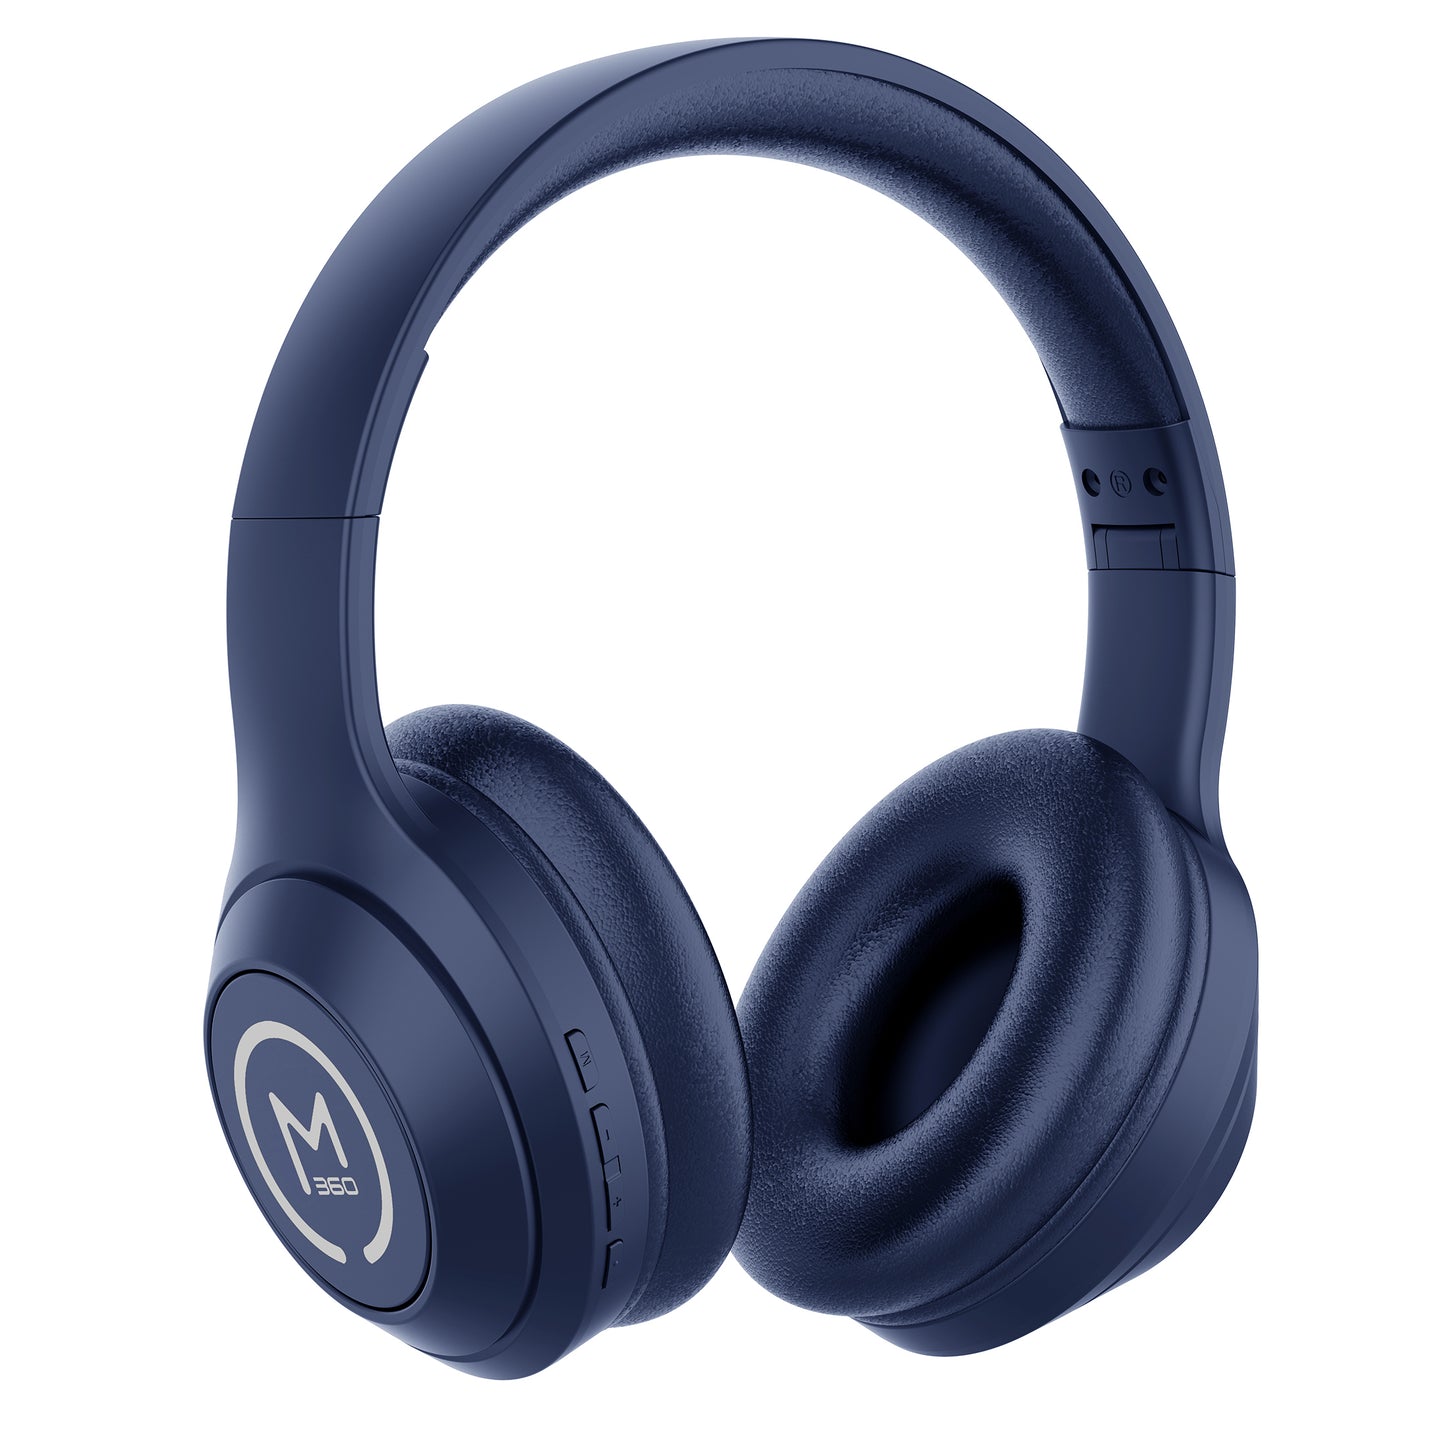 Morpheus 360 Comfort Plus Wireless Over-Ear Headphones - Bluetooth Headset with Microphone - 10H Playtime – Soft Comfortable Ear Cushions - HP6500